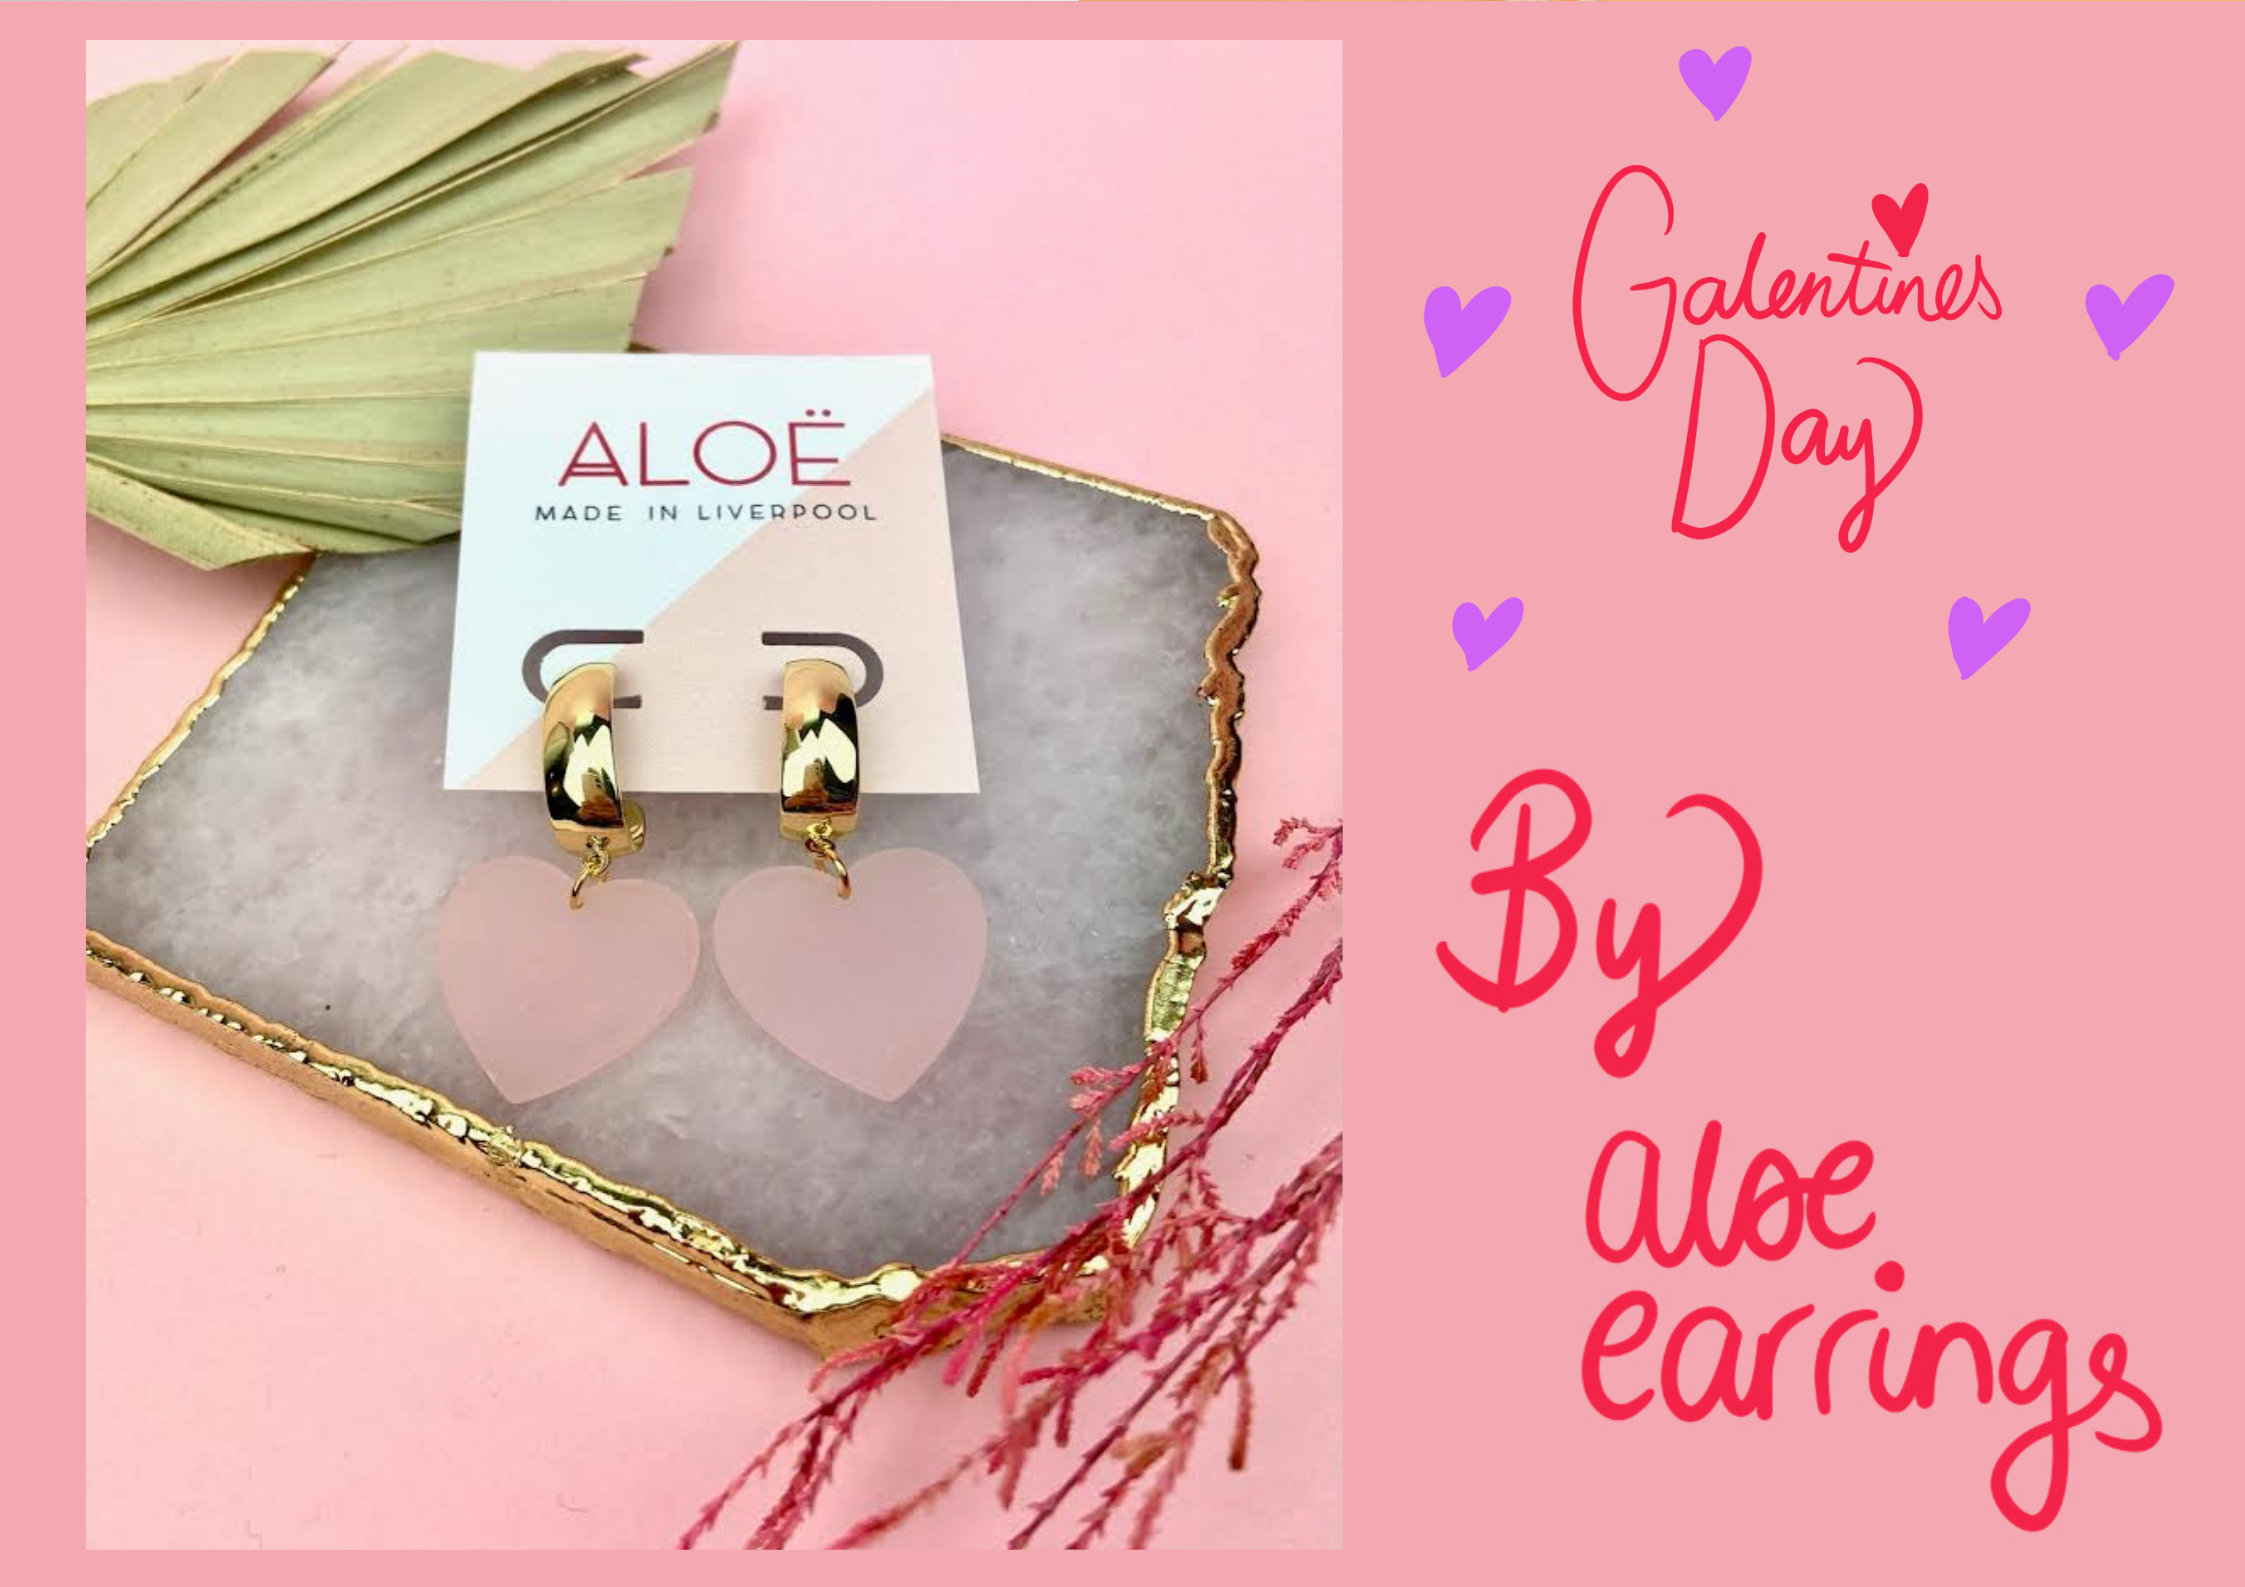 Aloe Earrings: The brand focusing on Galentines Day rather than Valentines…